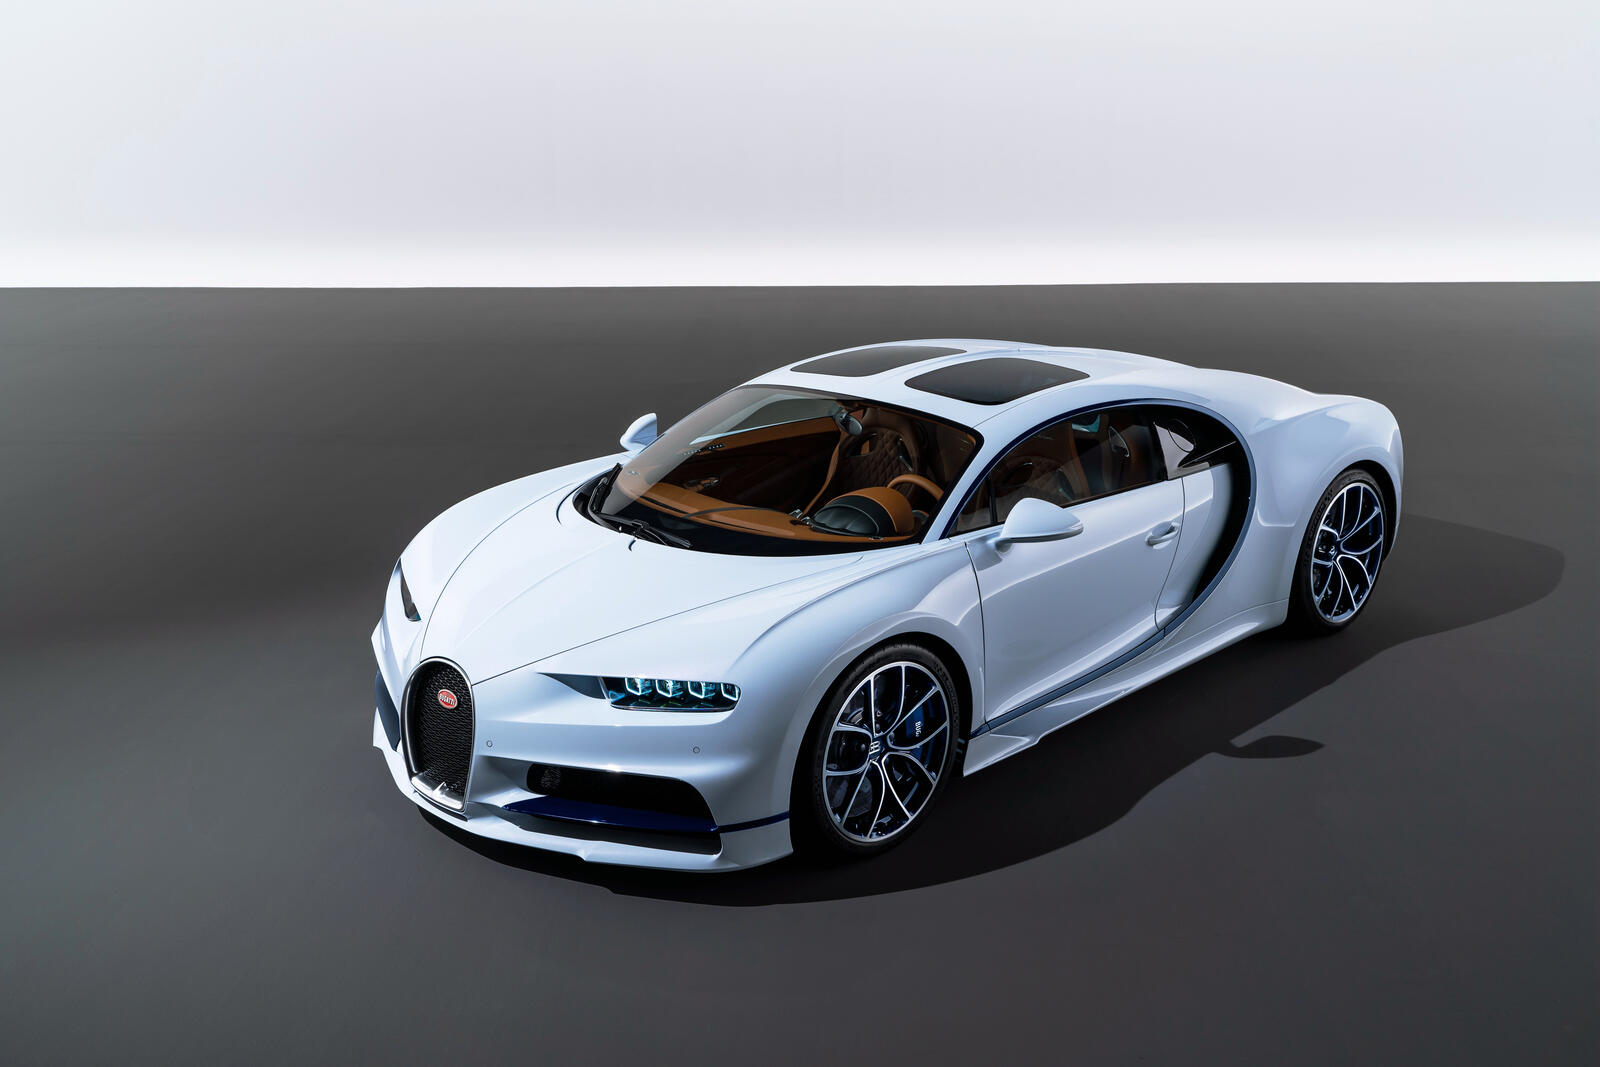 Wallpapers Bugatti Chiron cars 2018 cars on the desktop